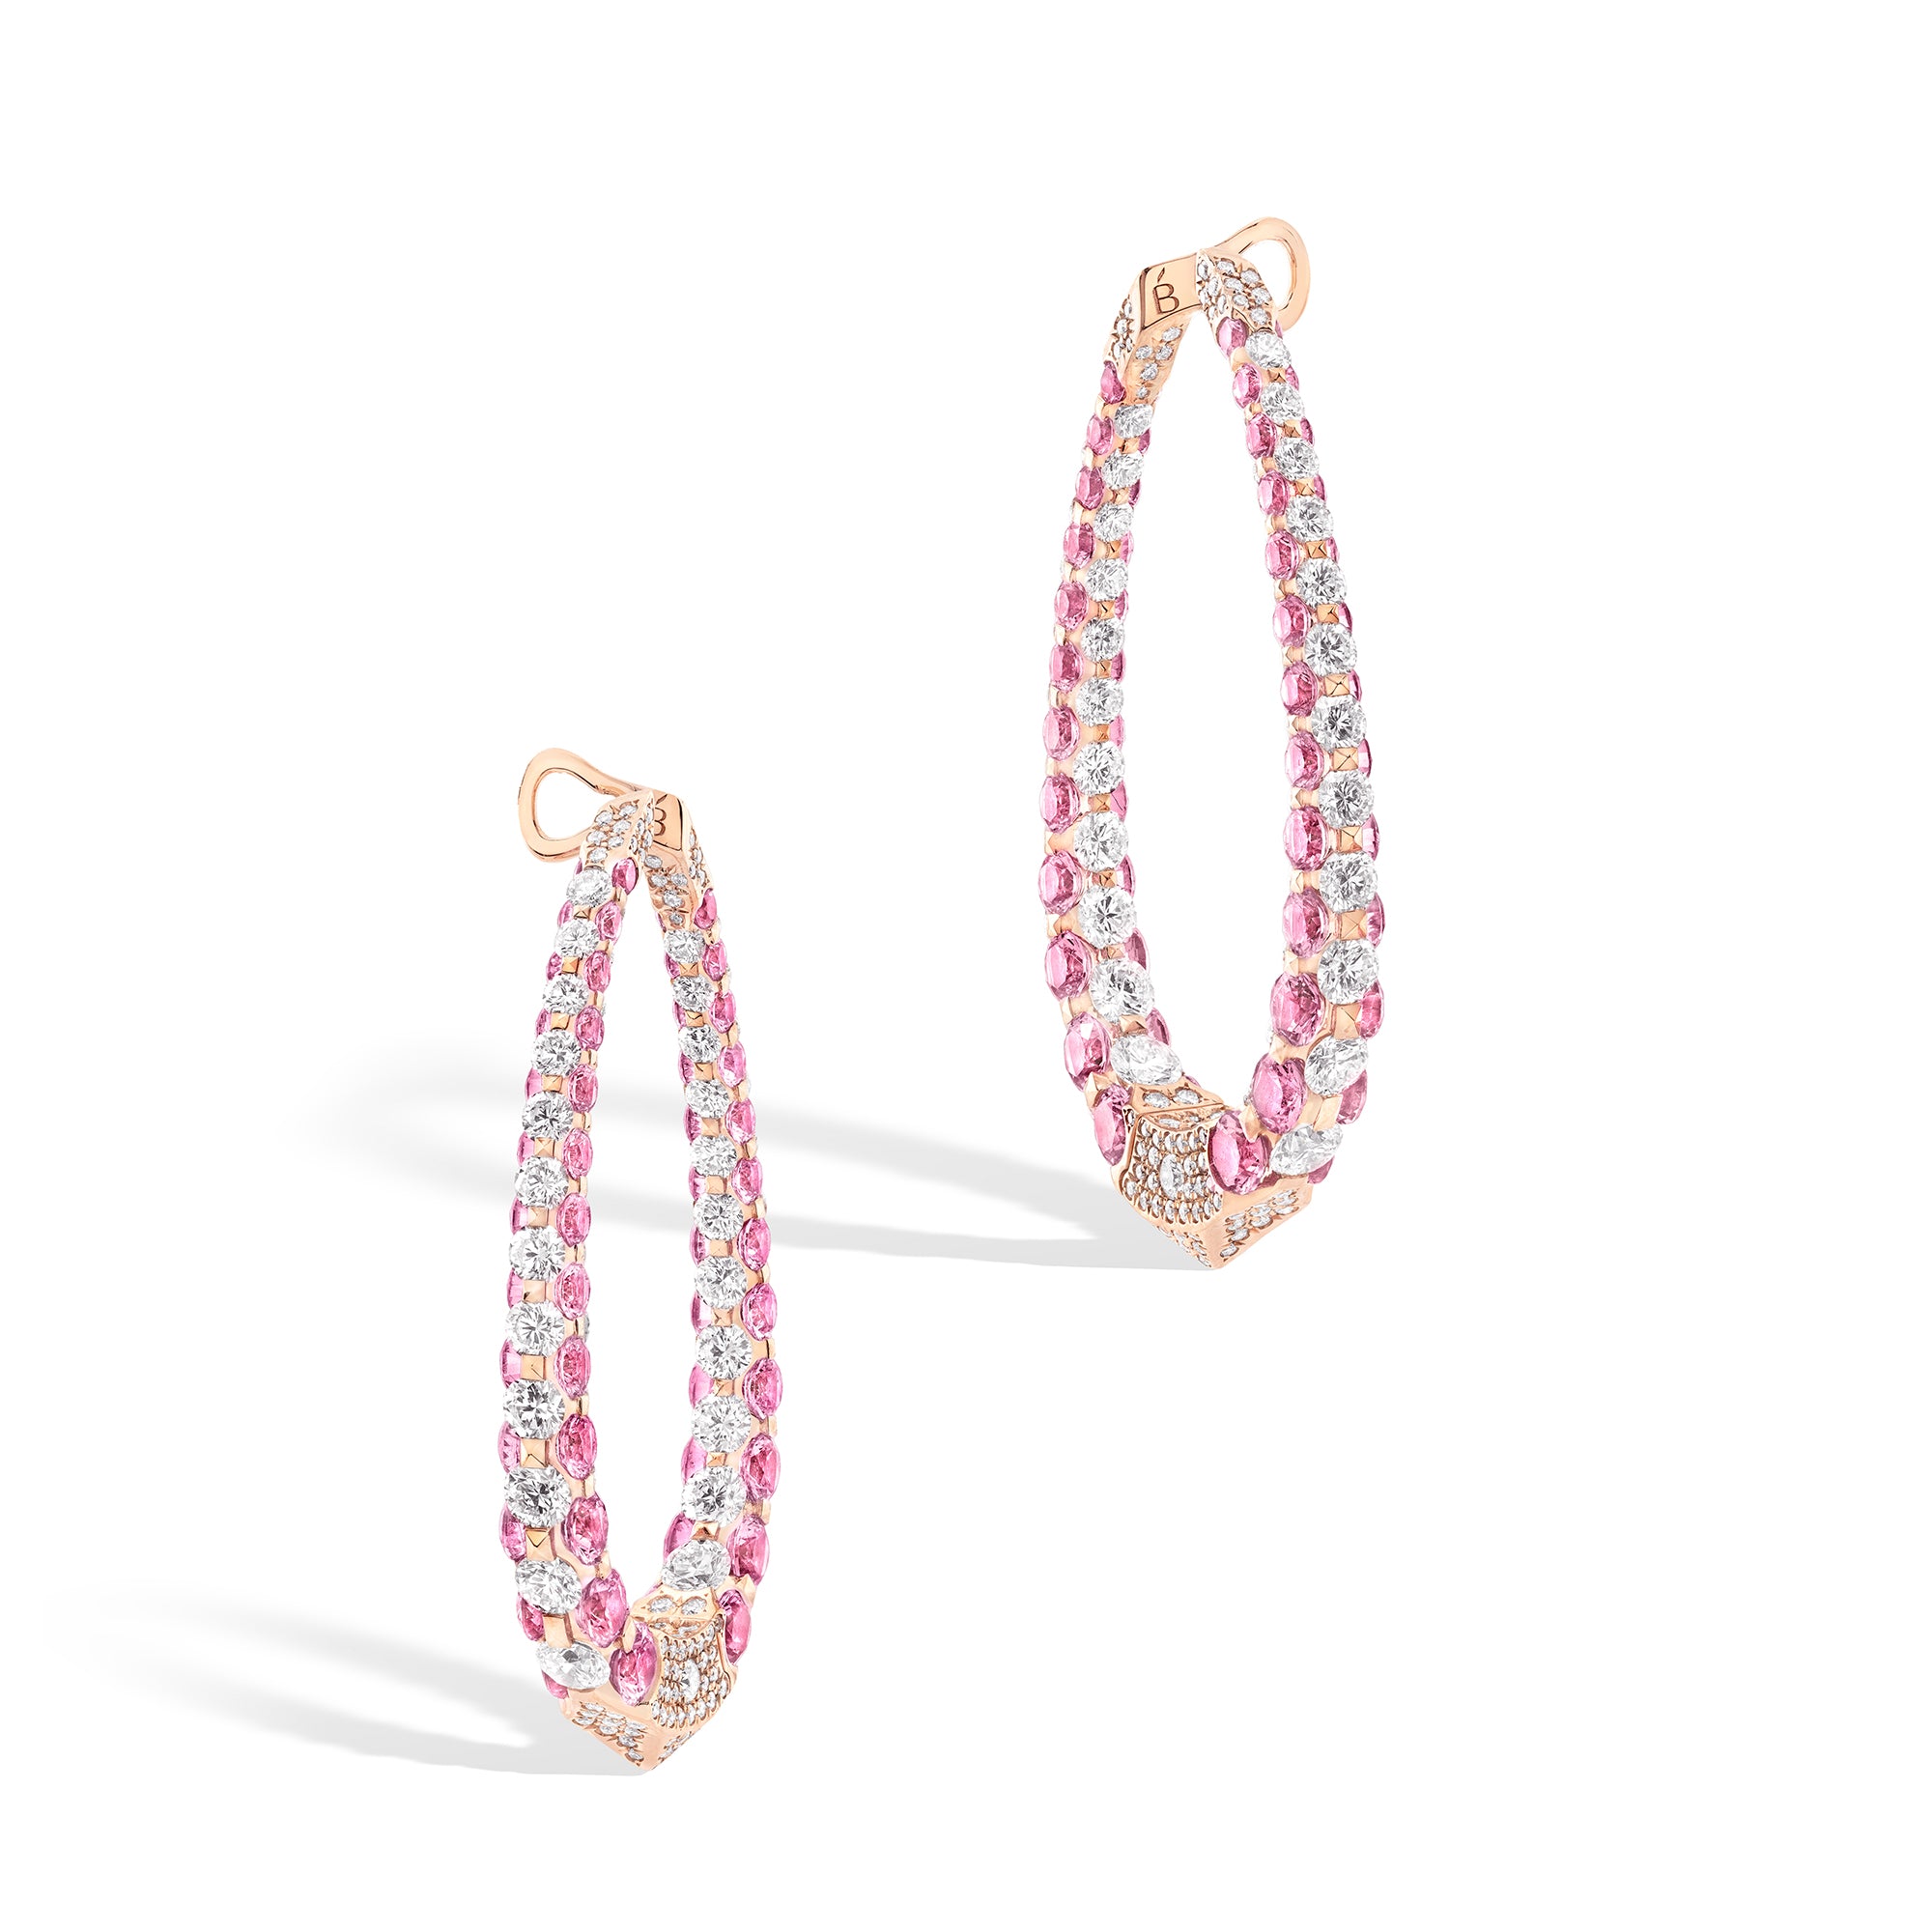 Merveilles Rose Halo - Diamond and Pink Sapphire Earrings - Large